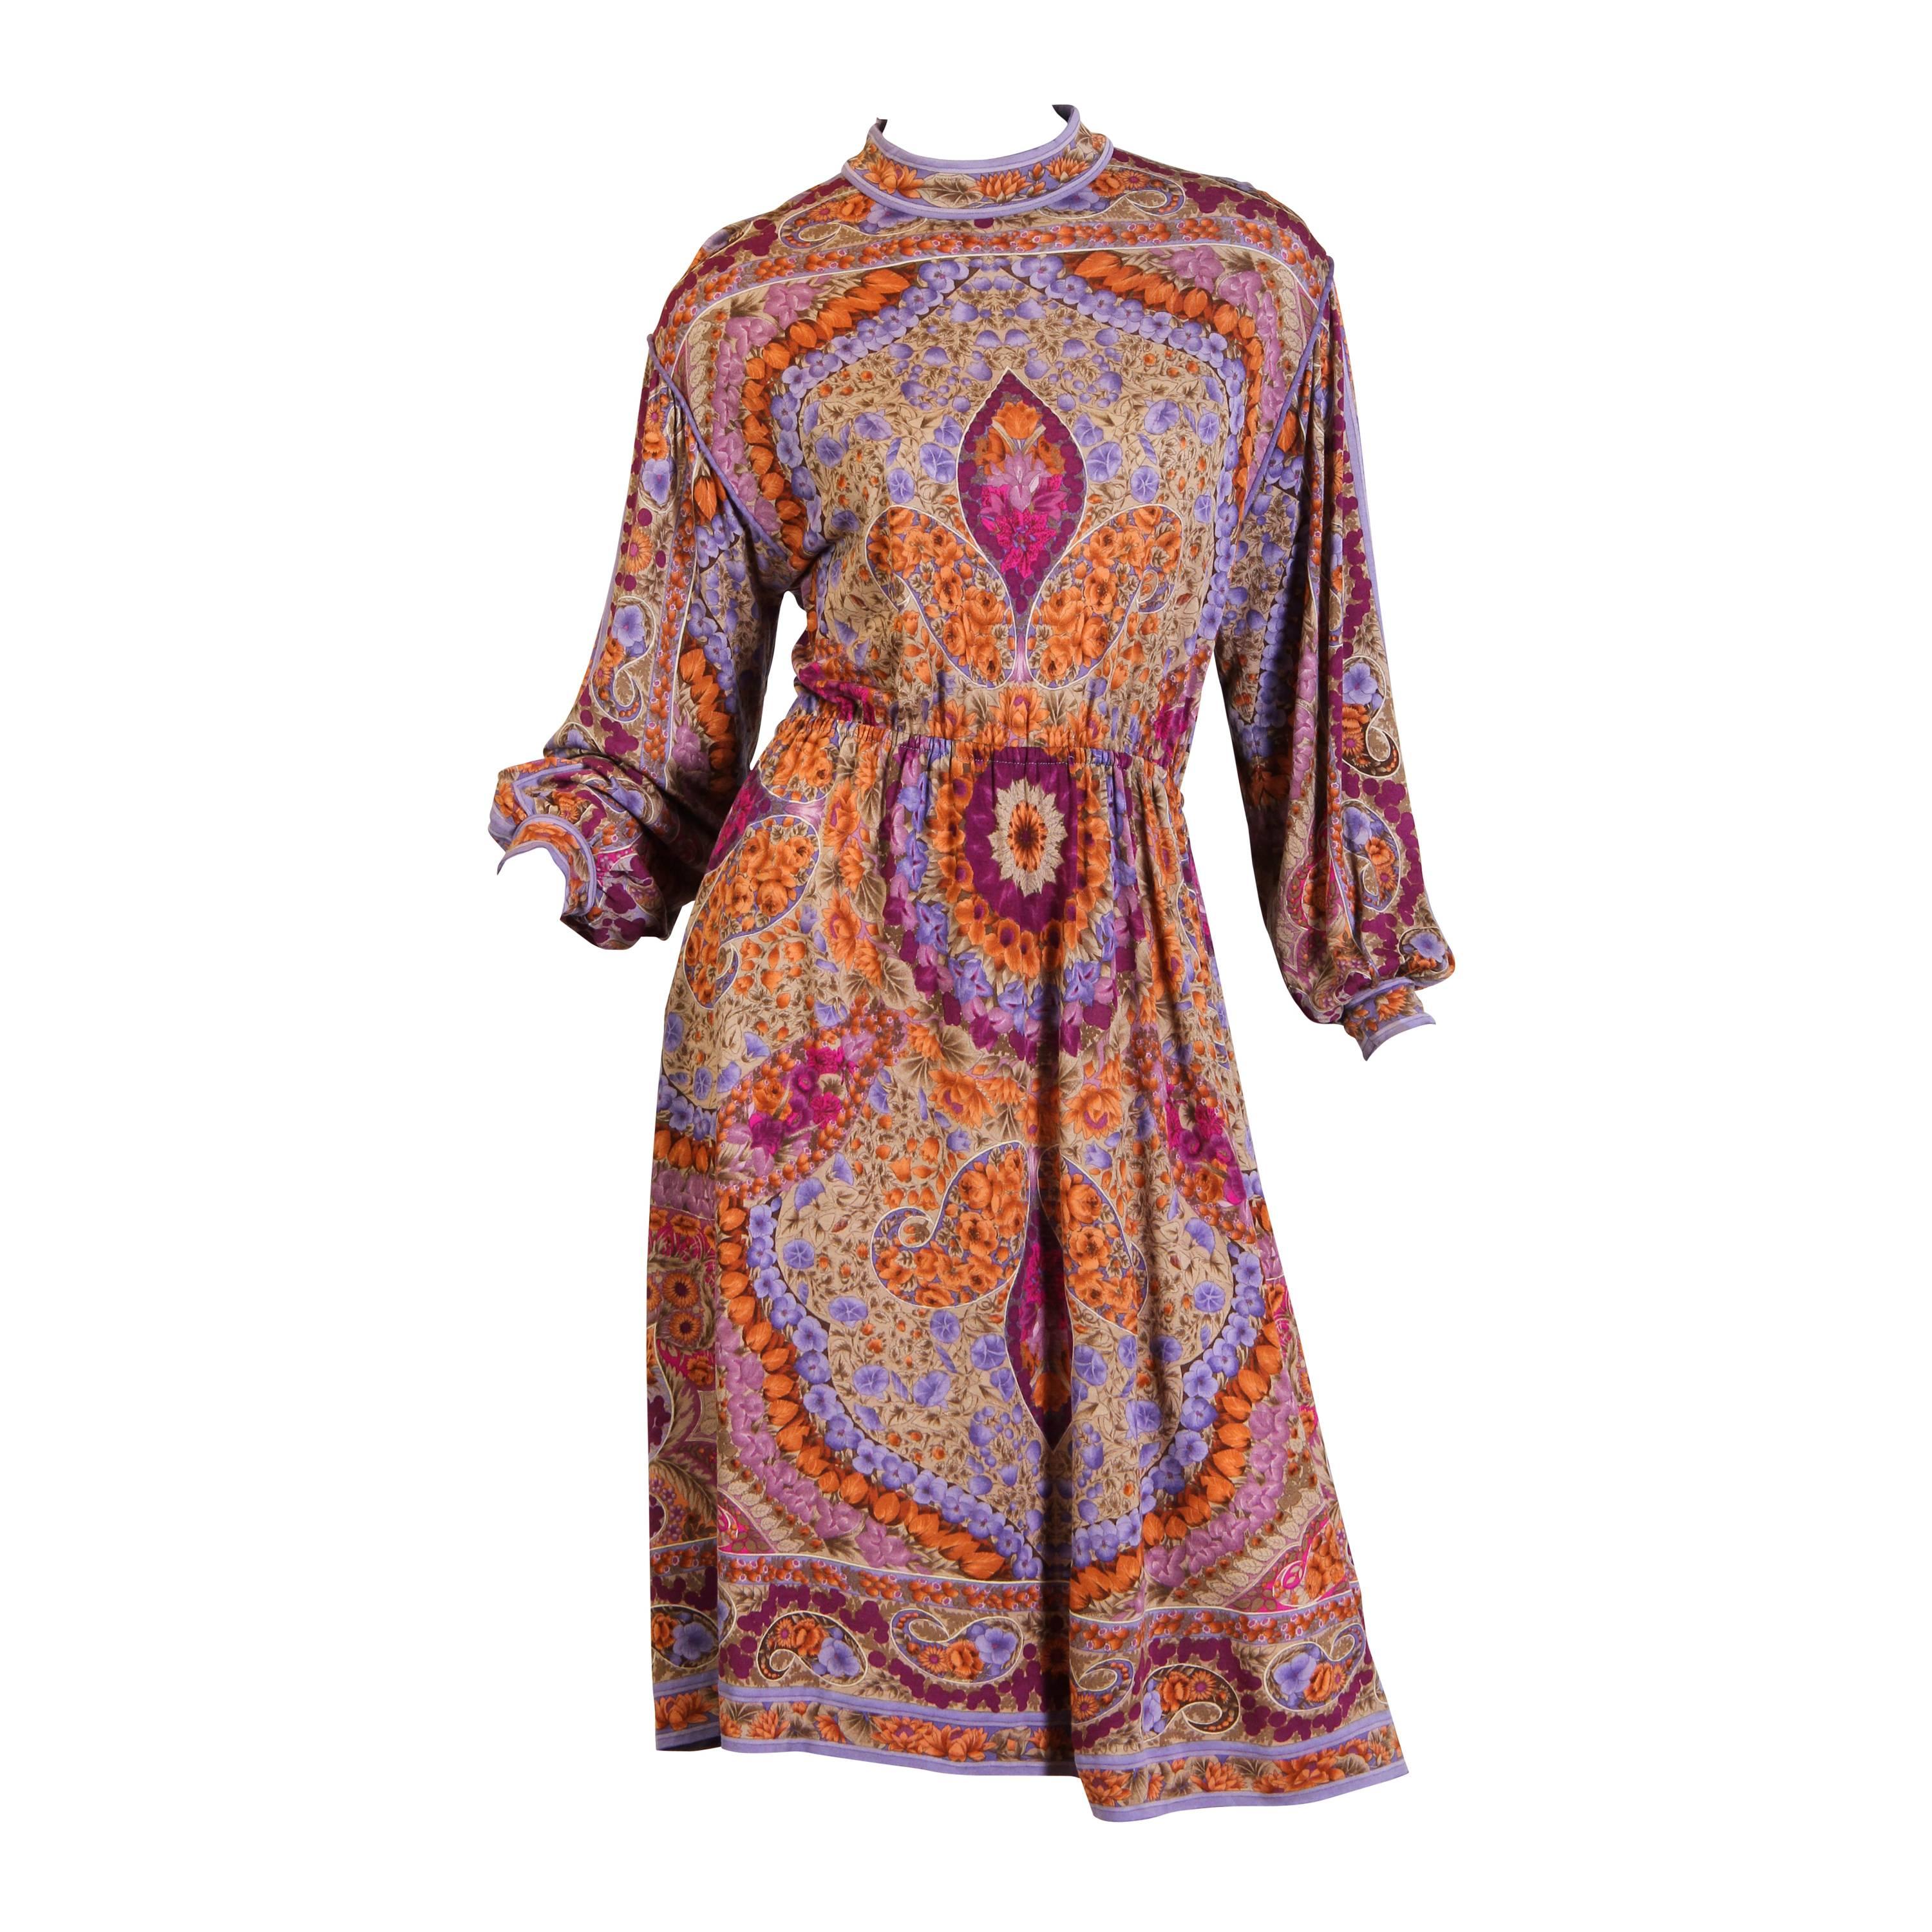 1970s Leonard Wool Jersey Dress with Rich Indian Floral Print